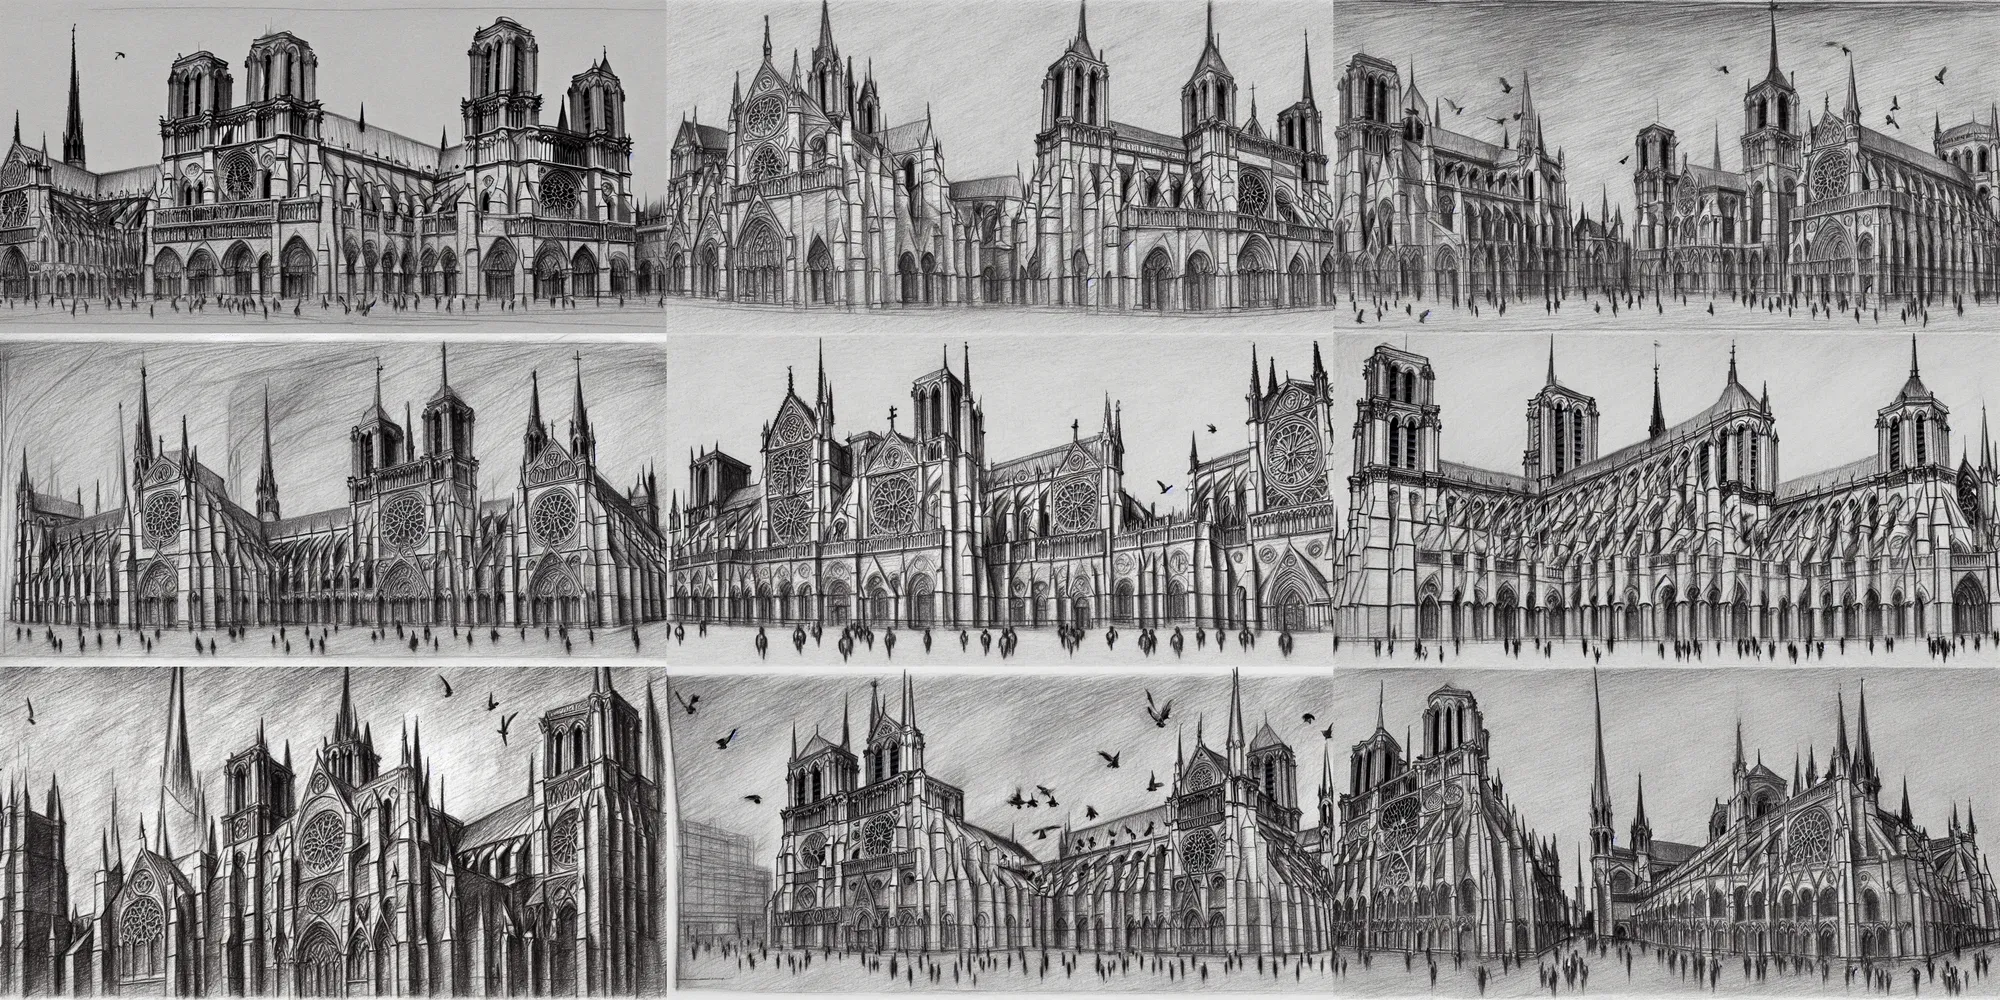 Prompt: notre dame on fire, 3 point perspective, architecture pencil sketch by leonardo da vinci featuring pigeons fleeing the scene, birds eye